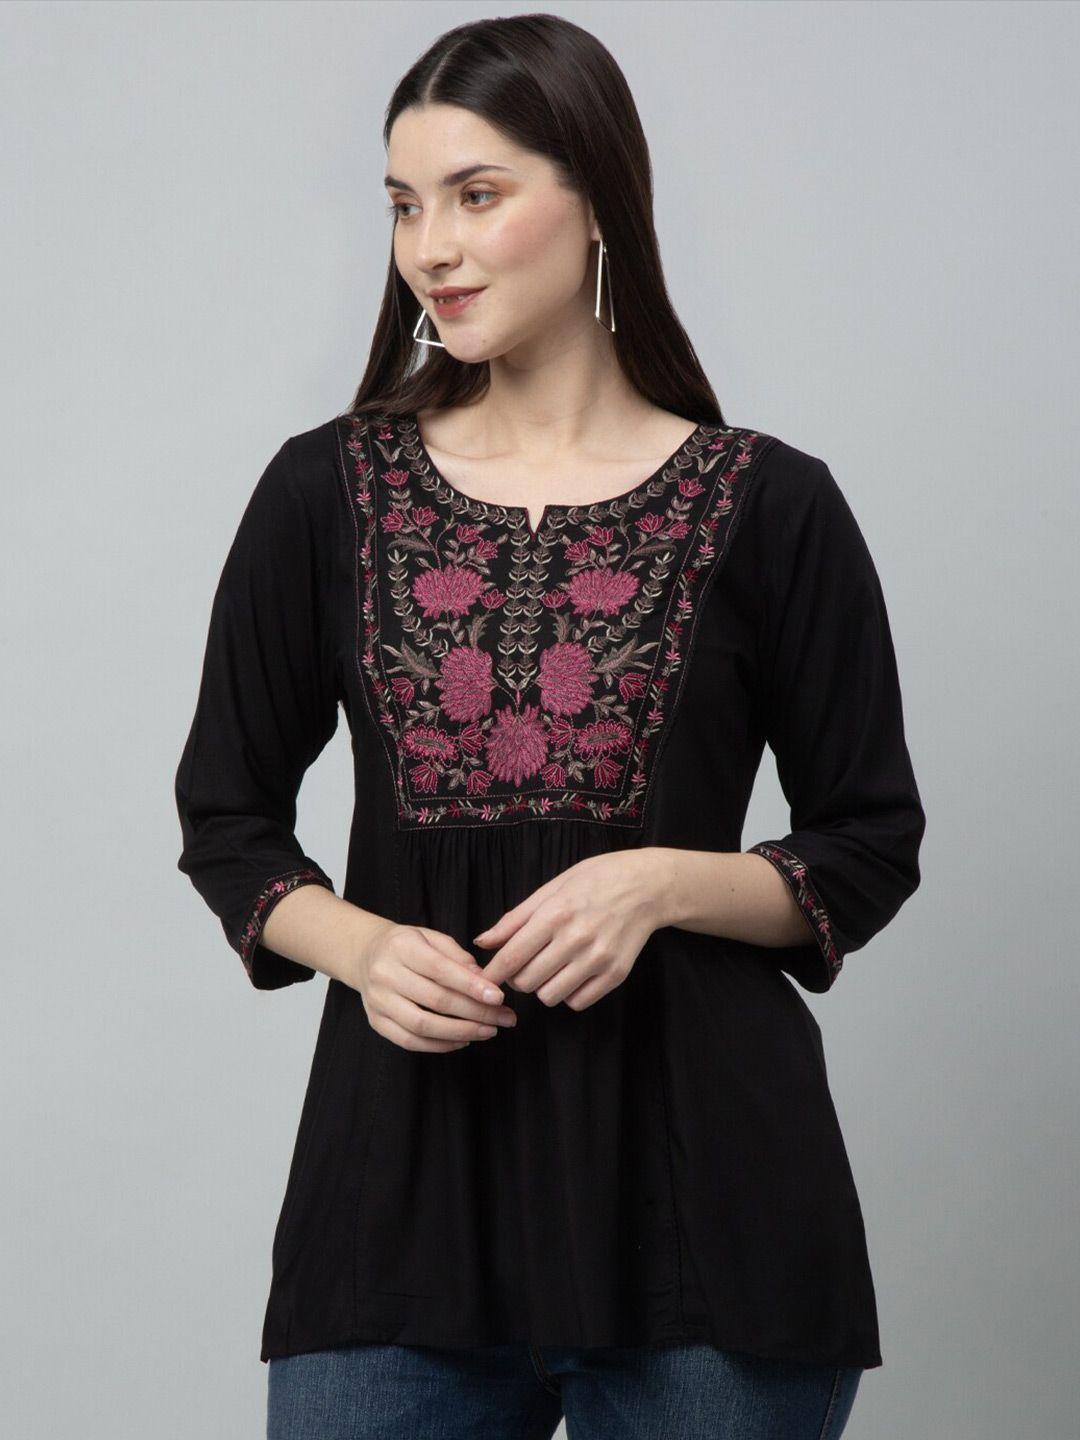 gracit-floral-embroidery-round-neck-three-quarter-flared-sleeves-top